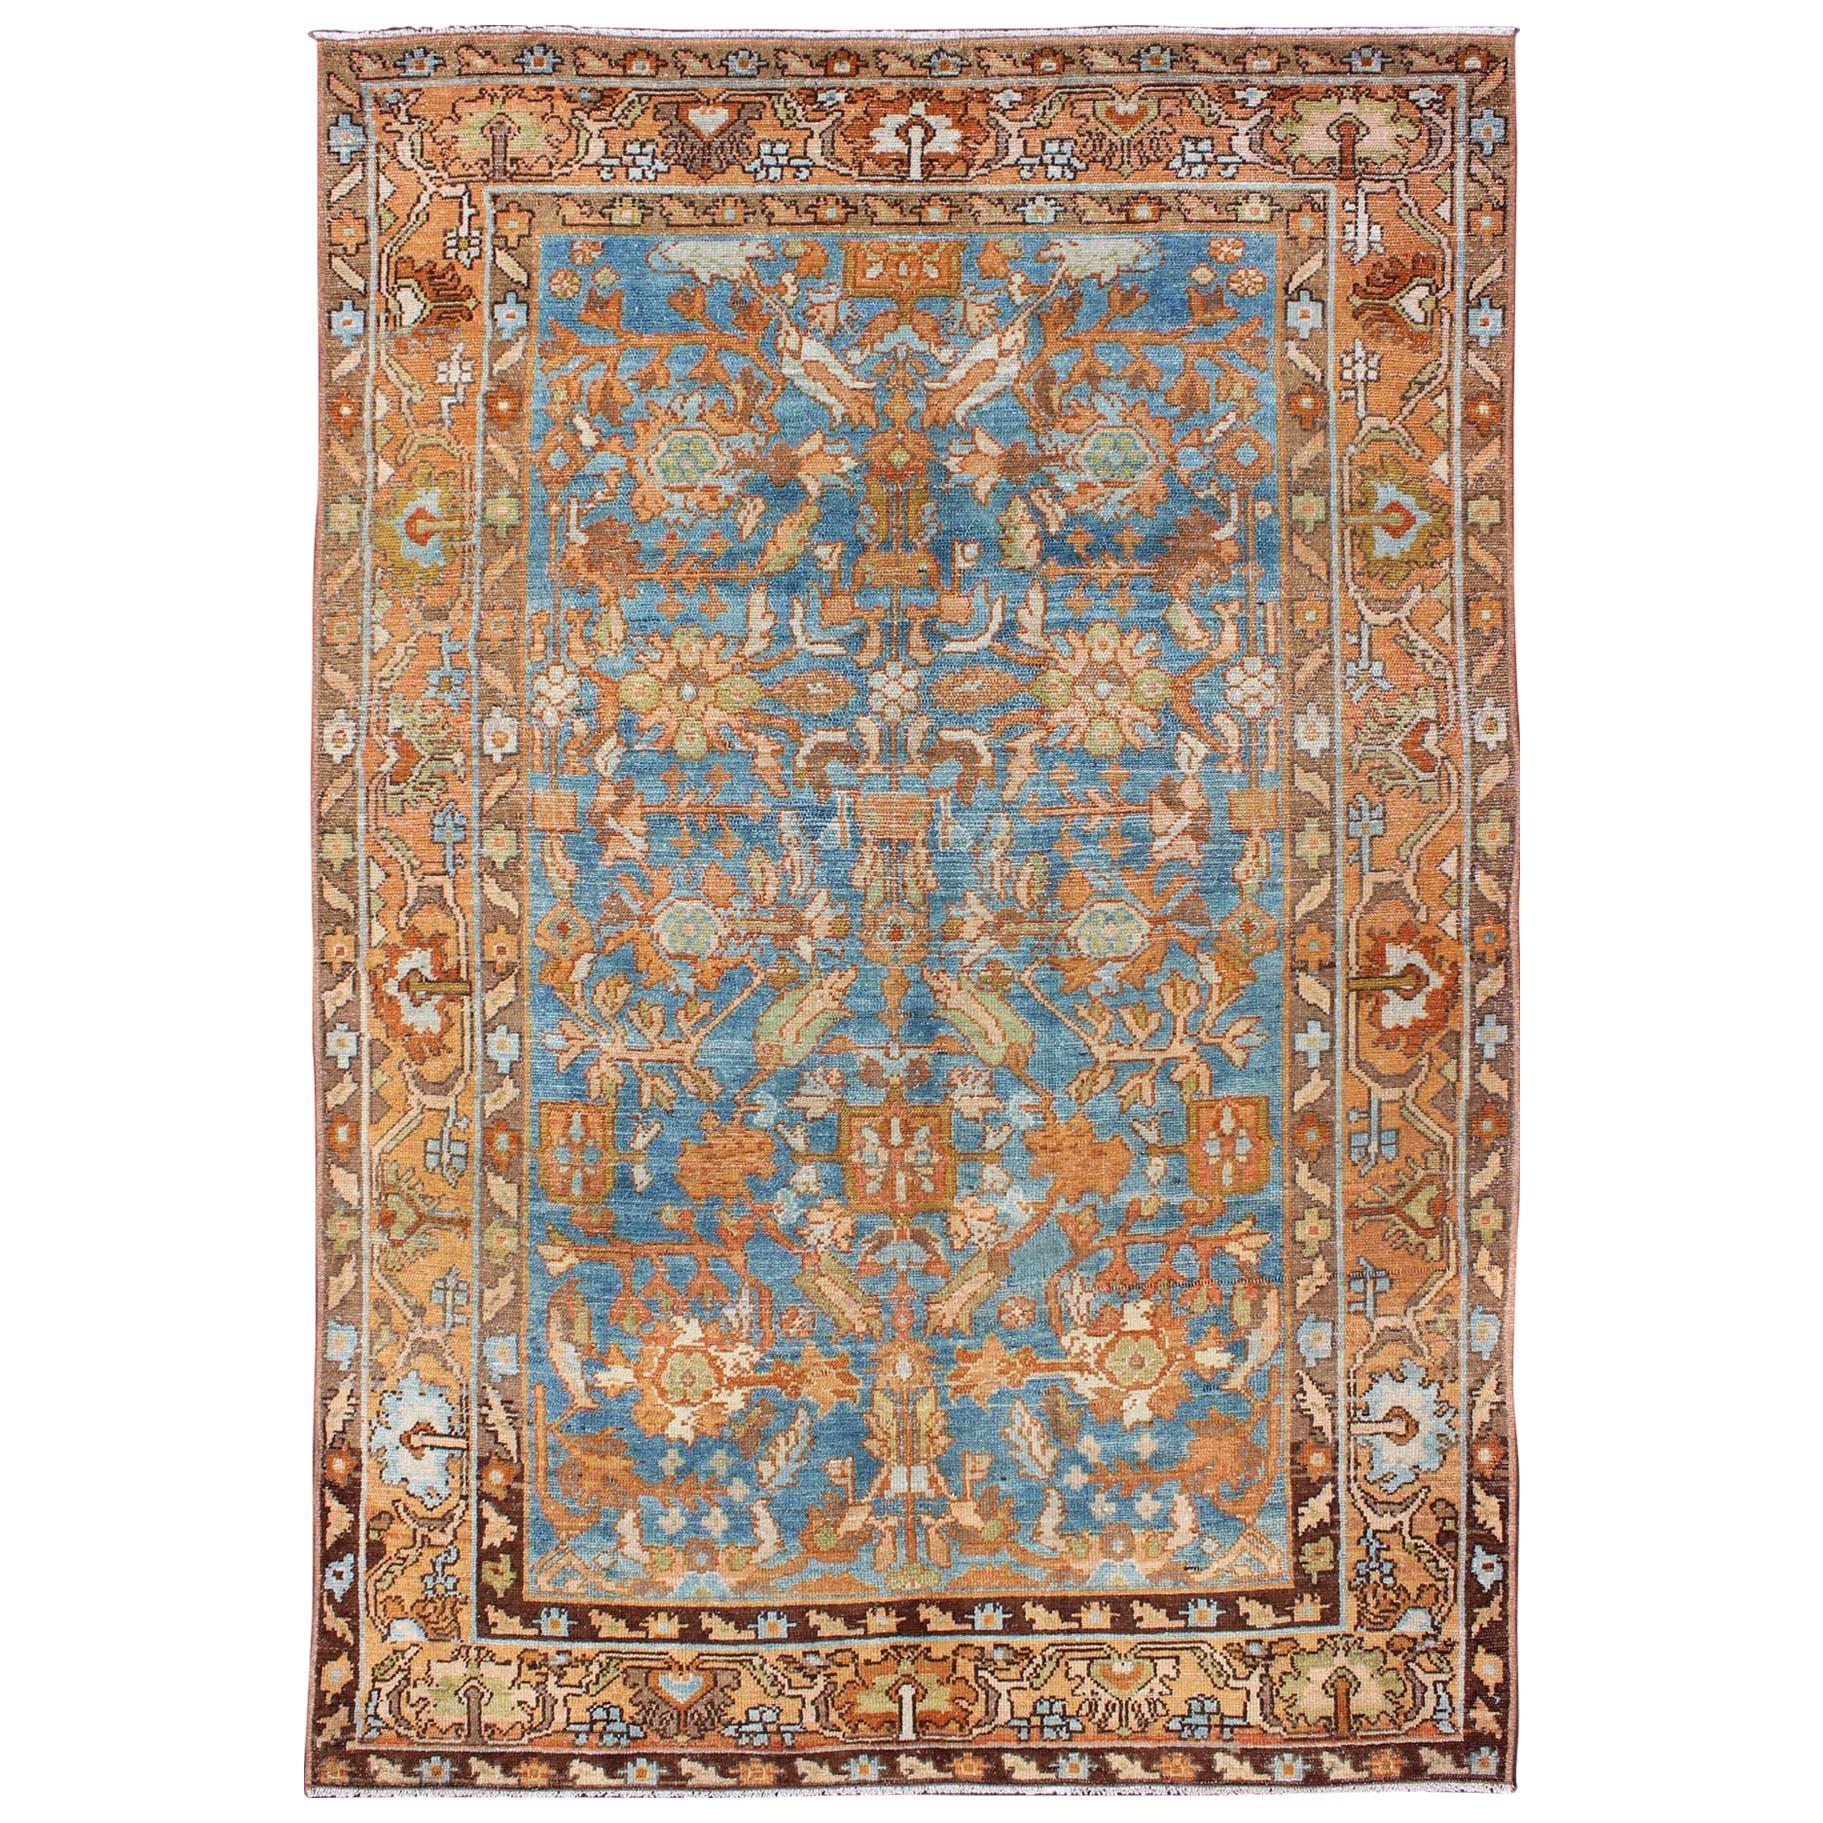 Vibrant Antique Persian Malayer Rug in Shades of Rust, Orange, and Blue